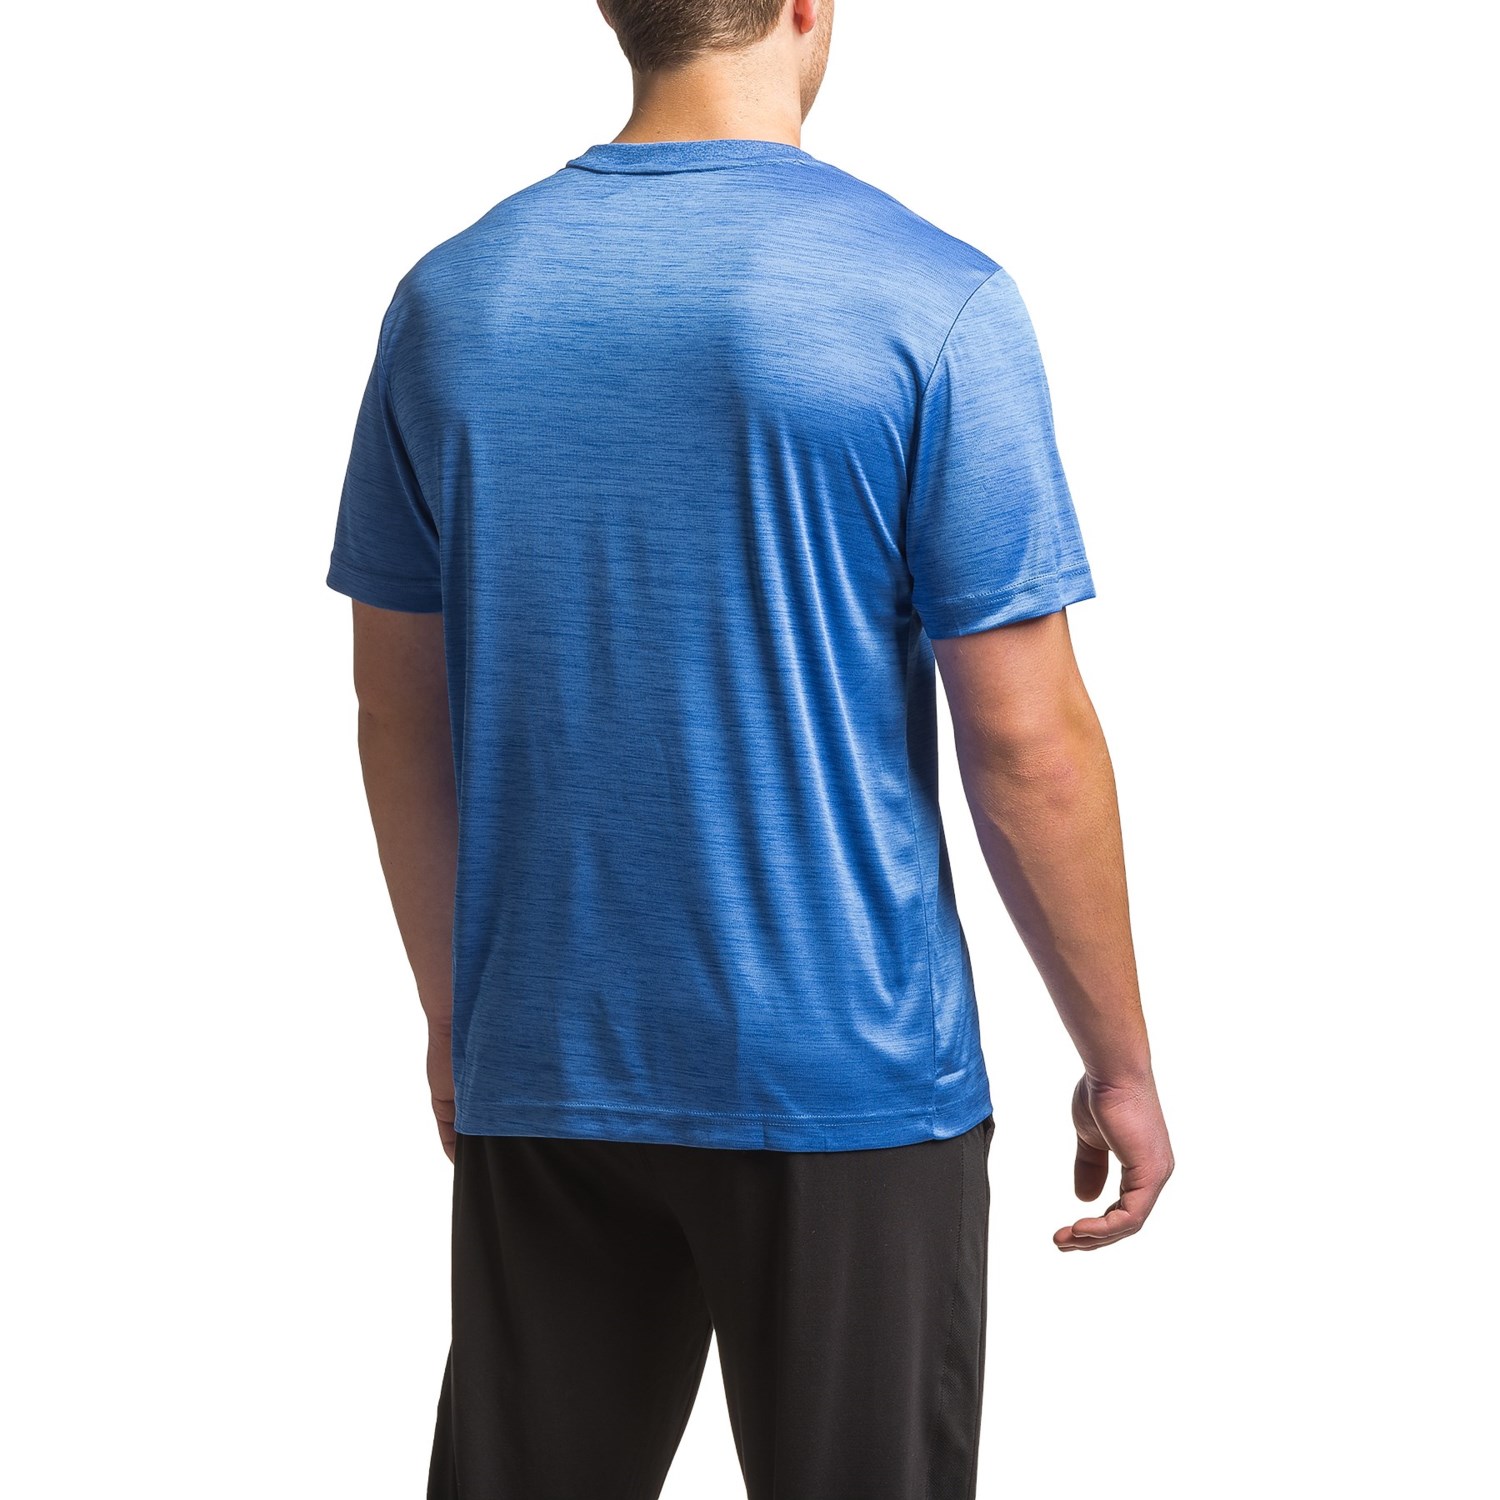 Buy reebok dry fit t shirts - 54% OFF!